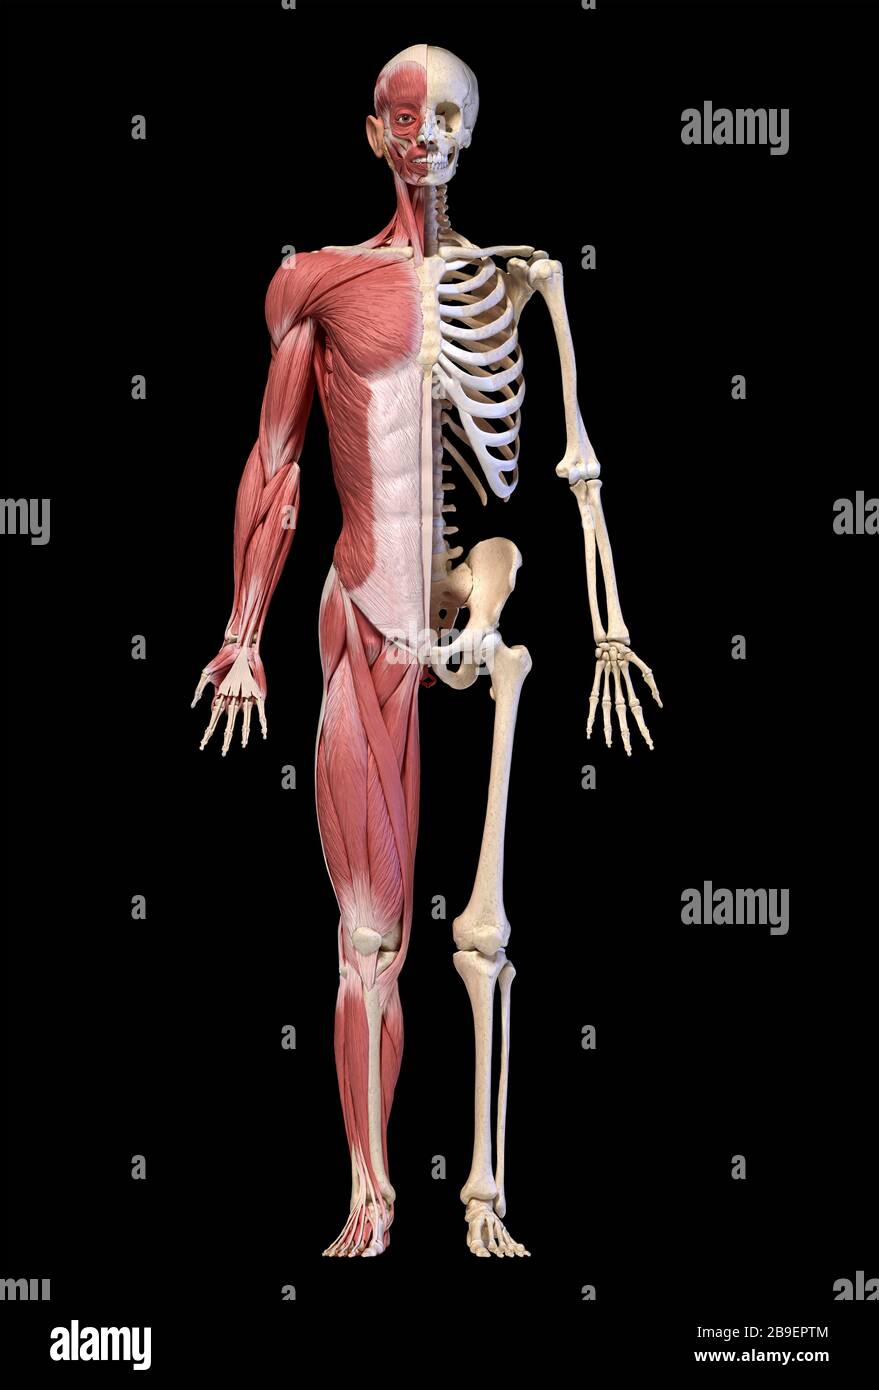 Anatomy of human male muscular and skeletal systems, front view, black background. Stock Photo